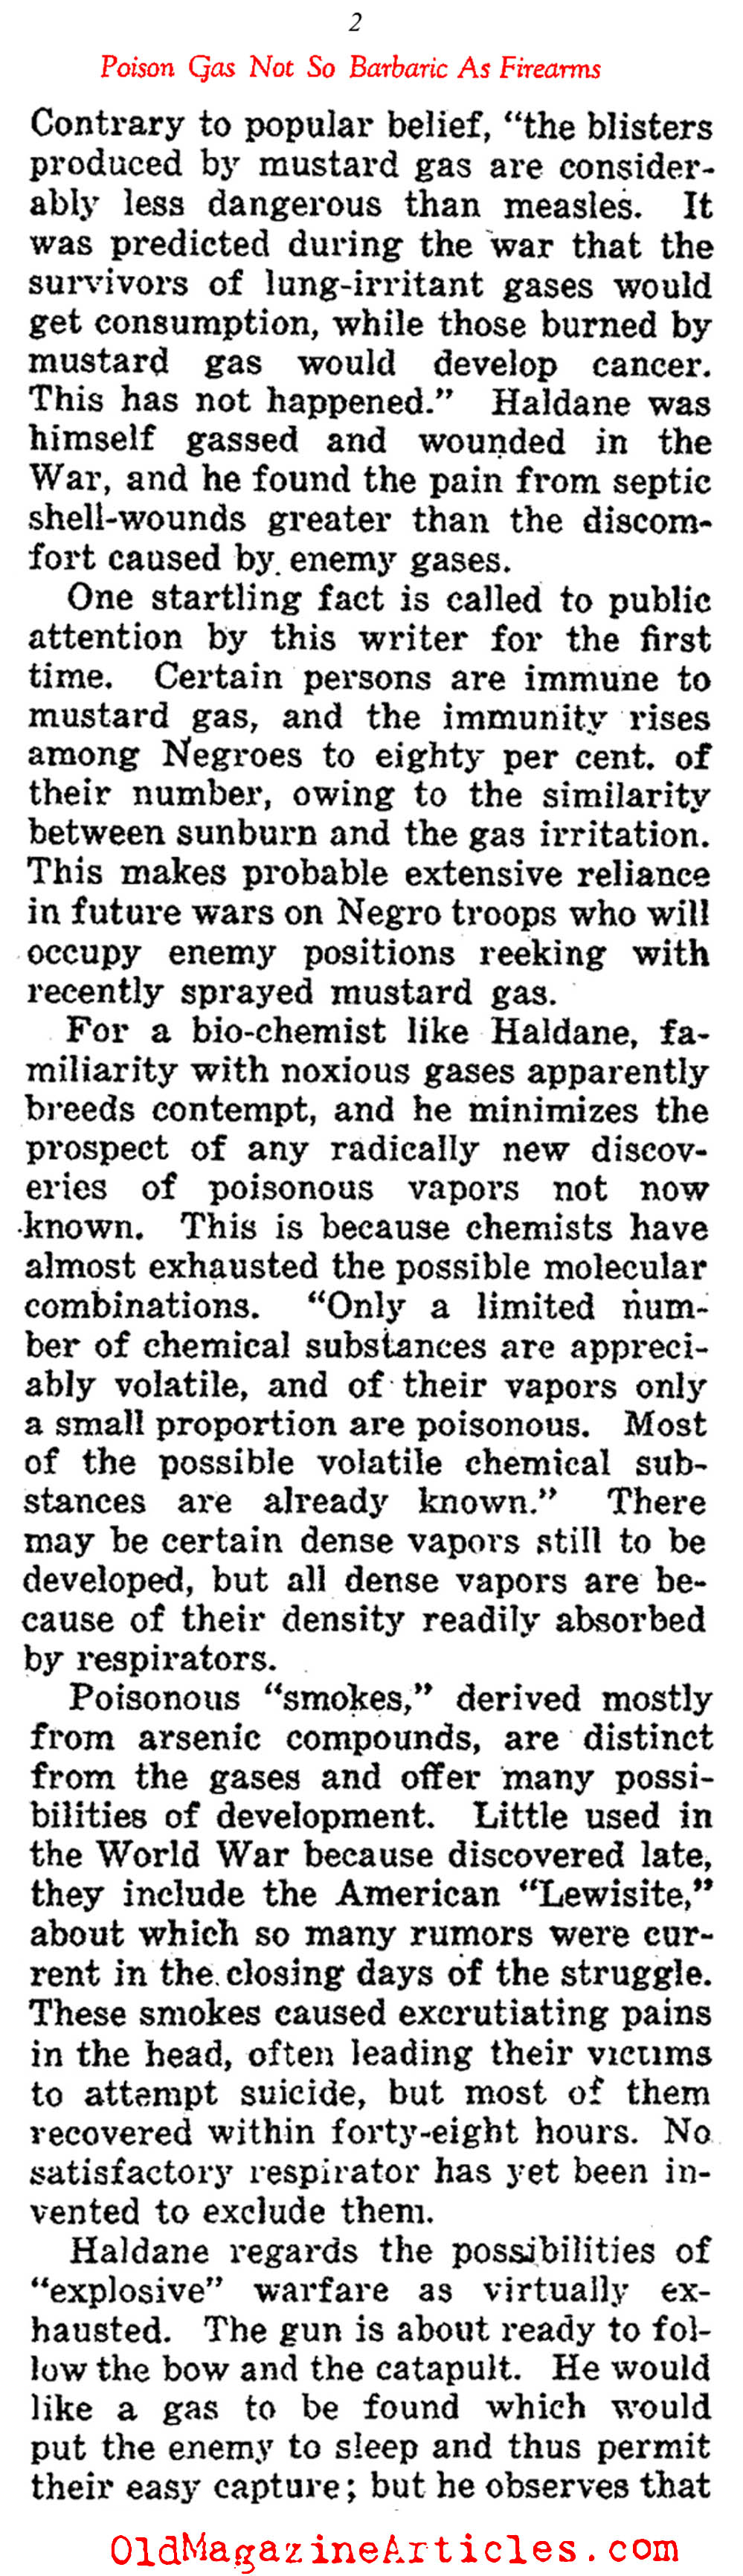 Reconsidering Poison Gas as a Weapon (Current Opinion, 1925)